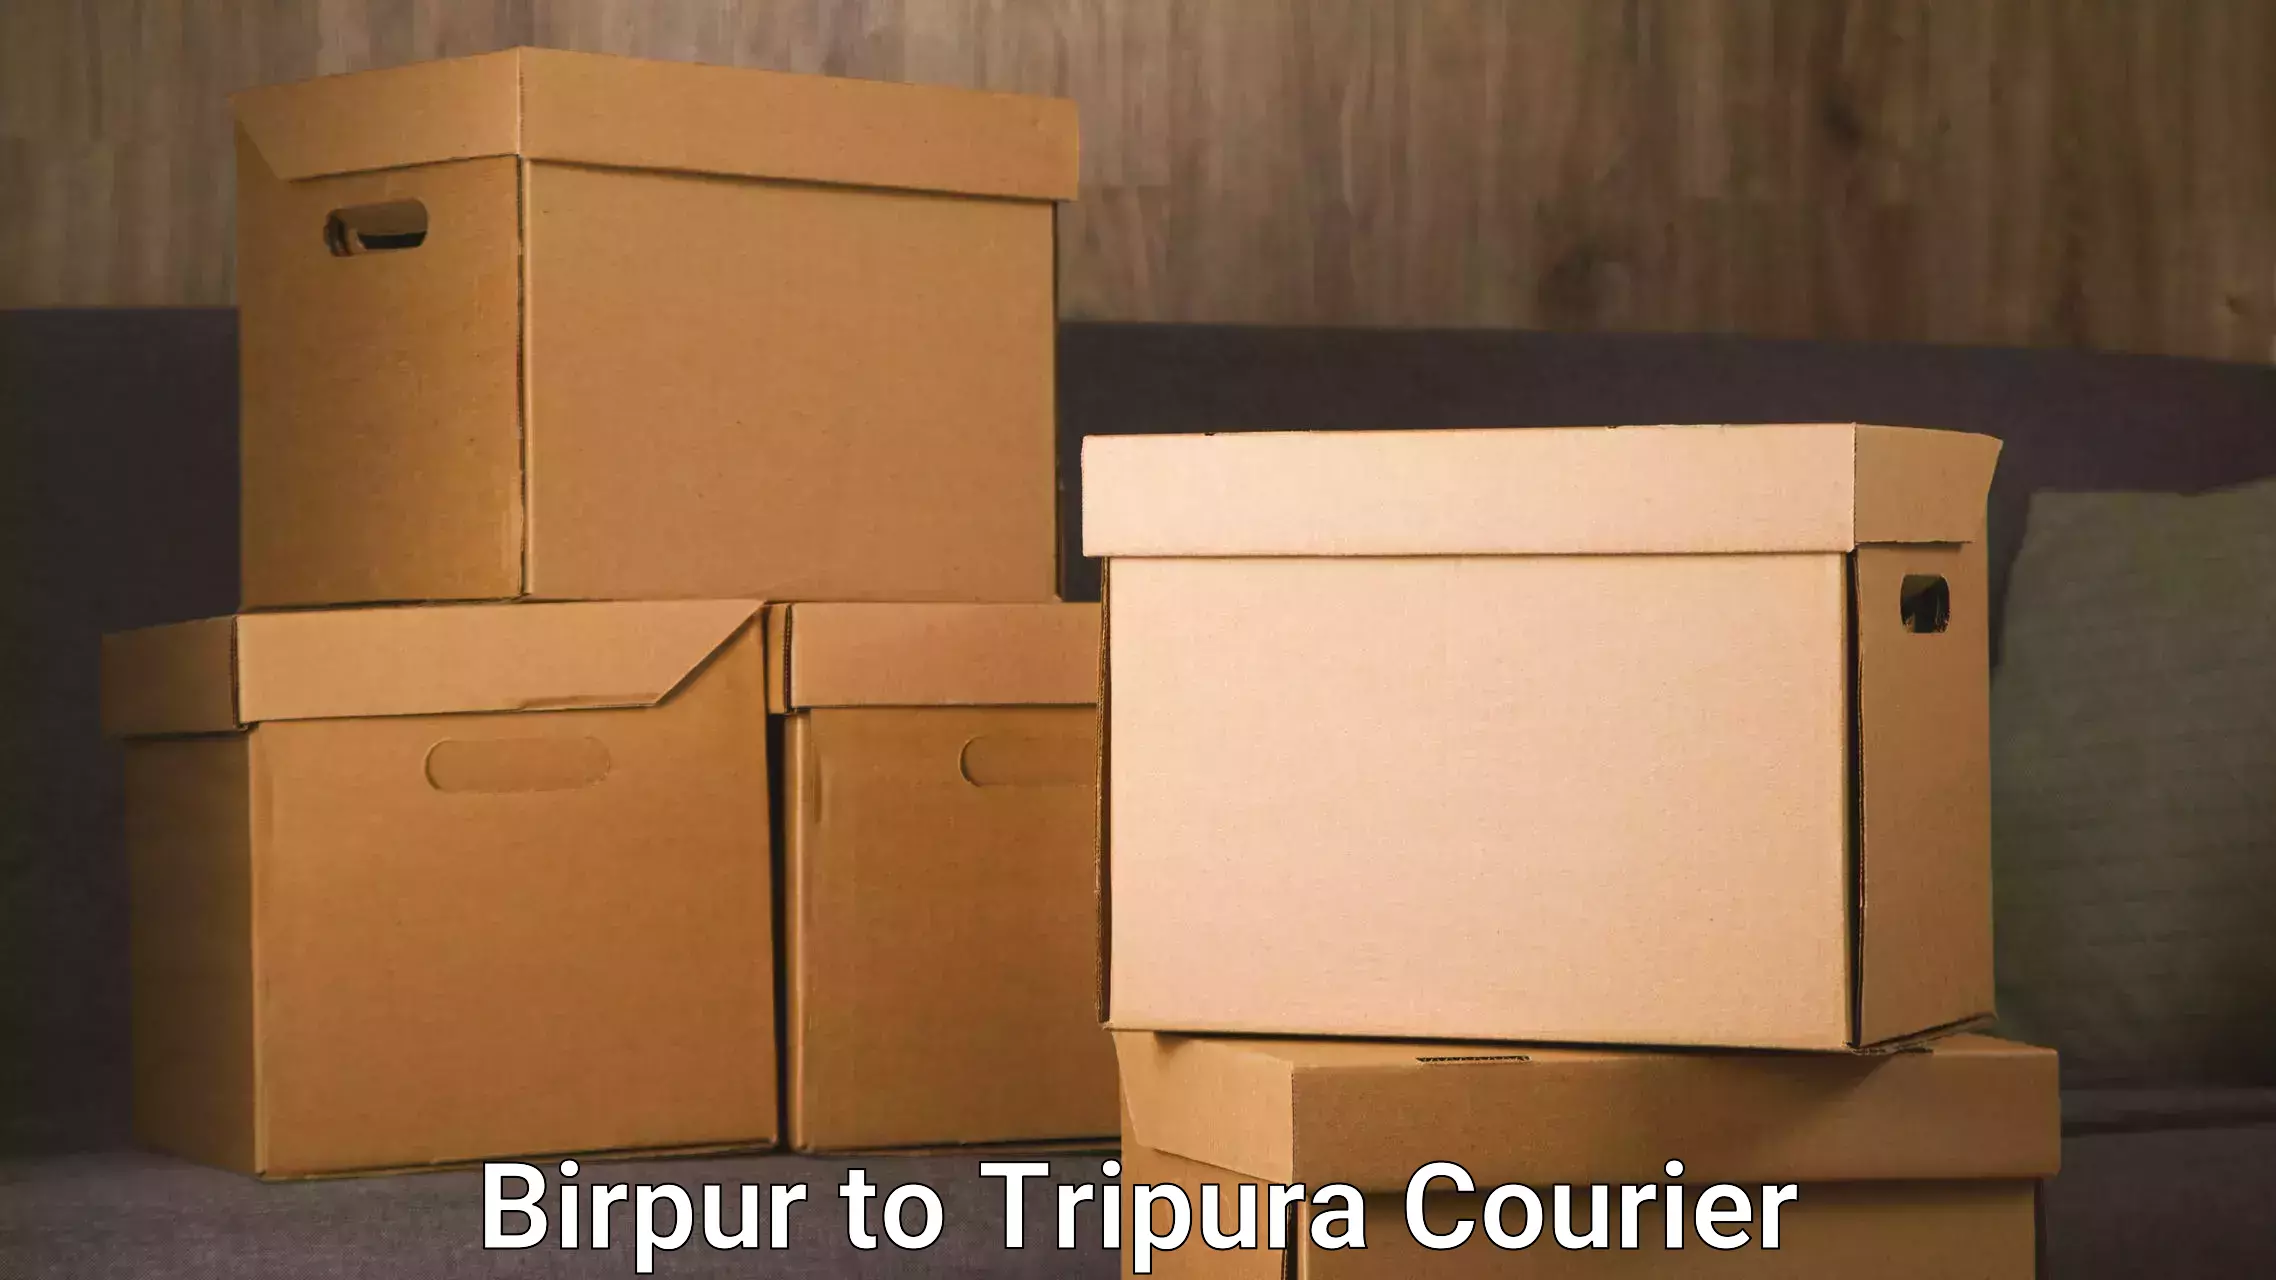 Reliable furniture movers Birpur to Udaipur Tripura